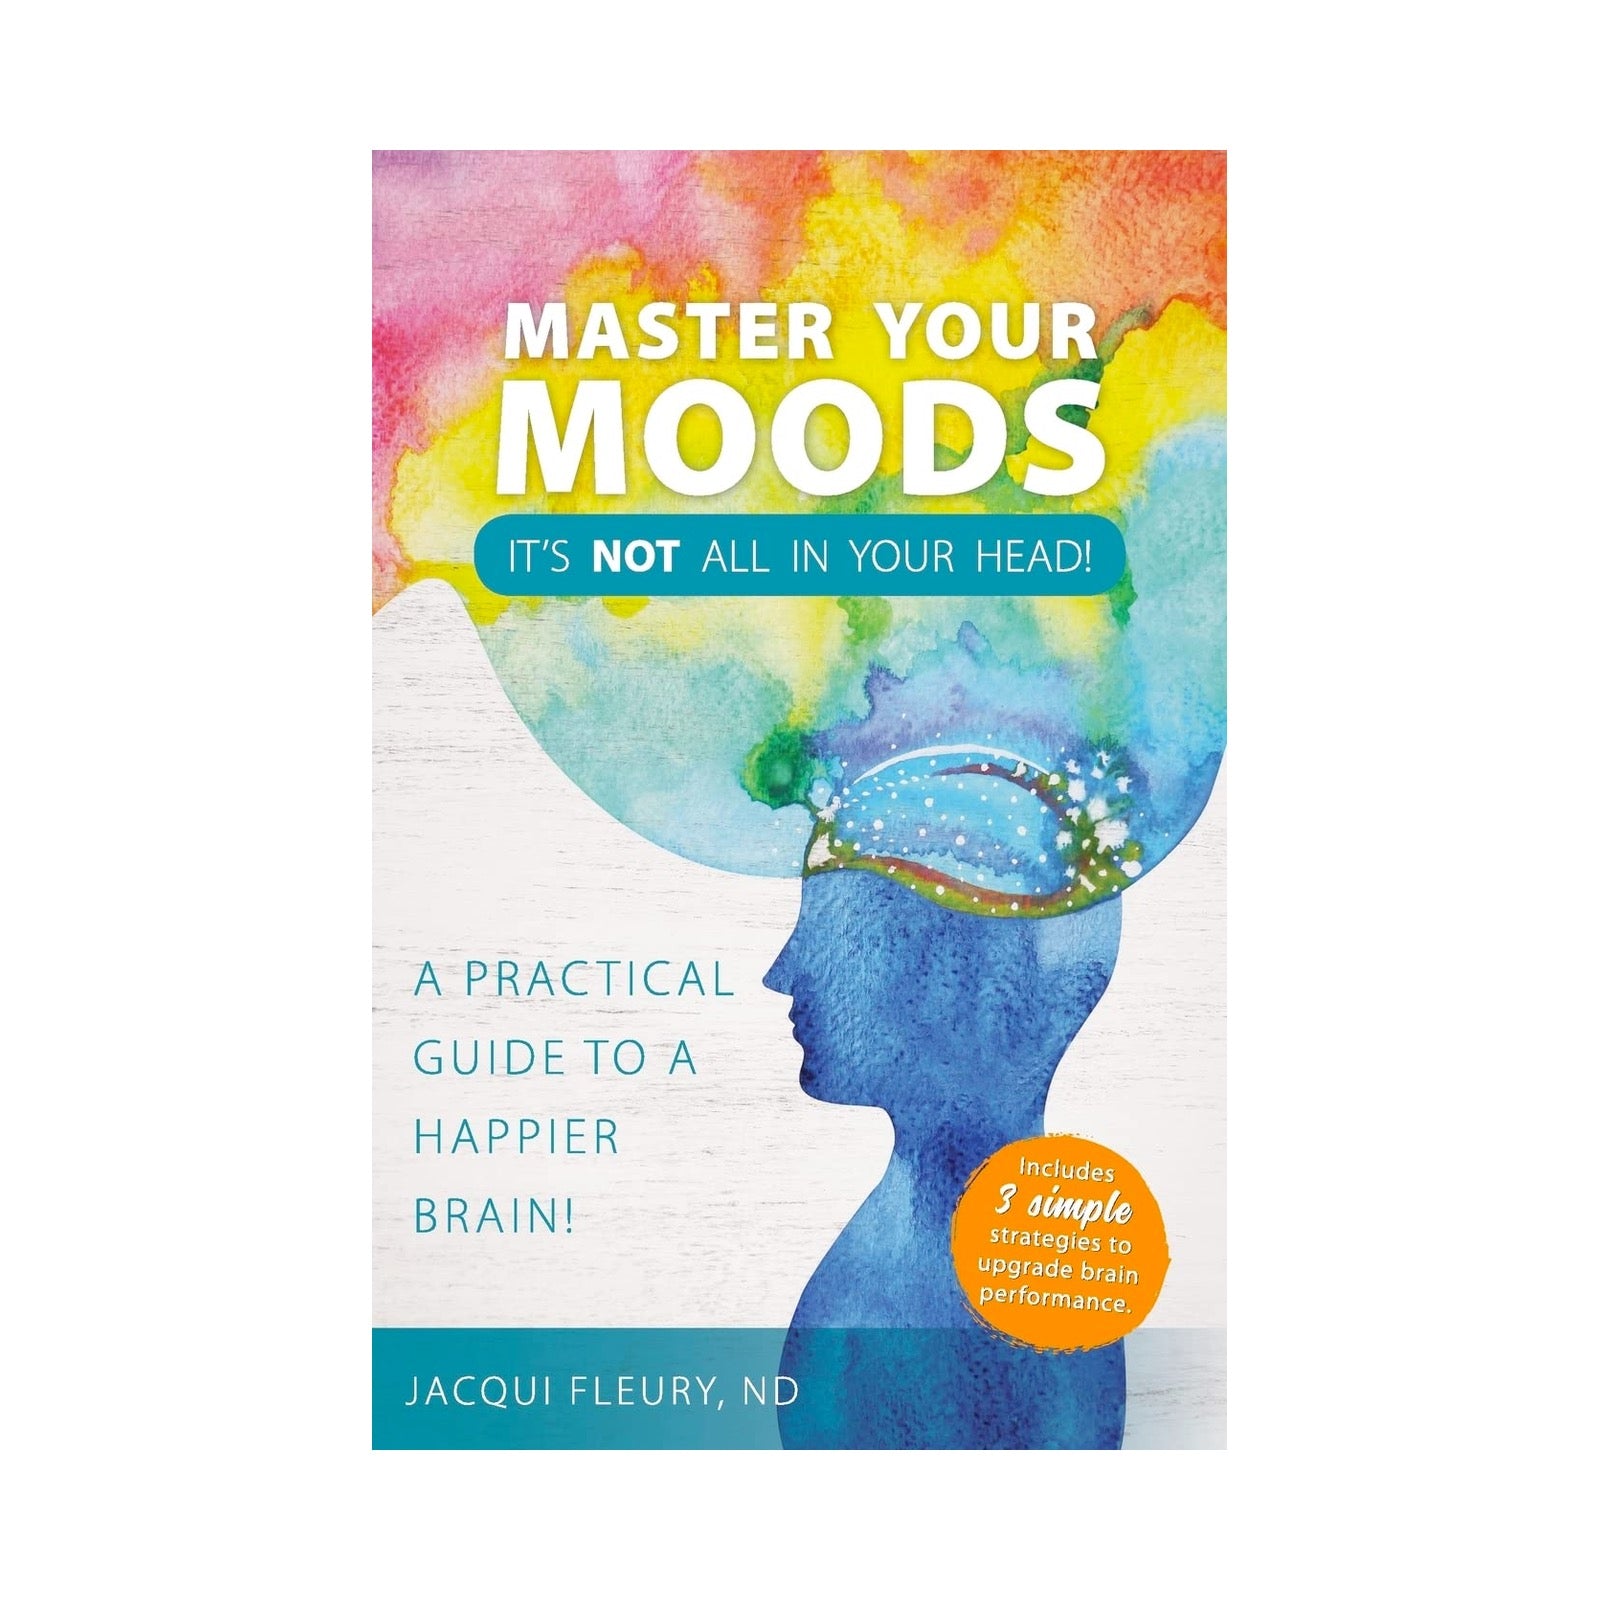 Master Your Moods: It's Not All in Your Head